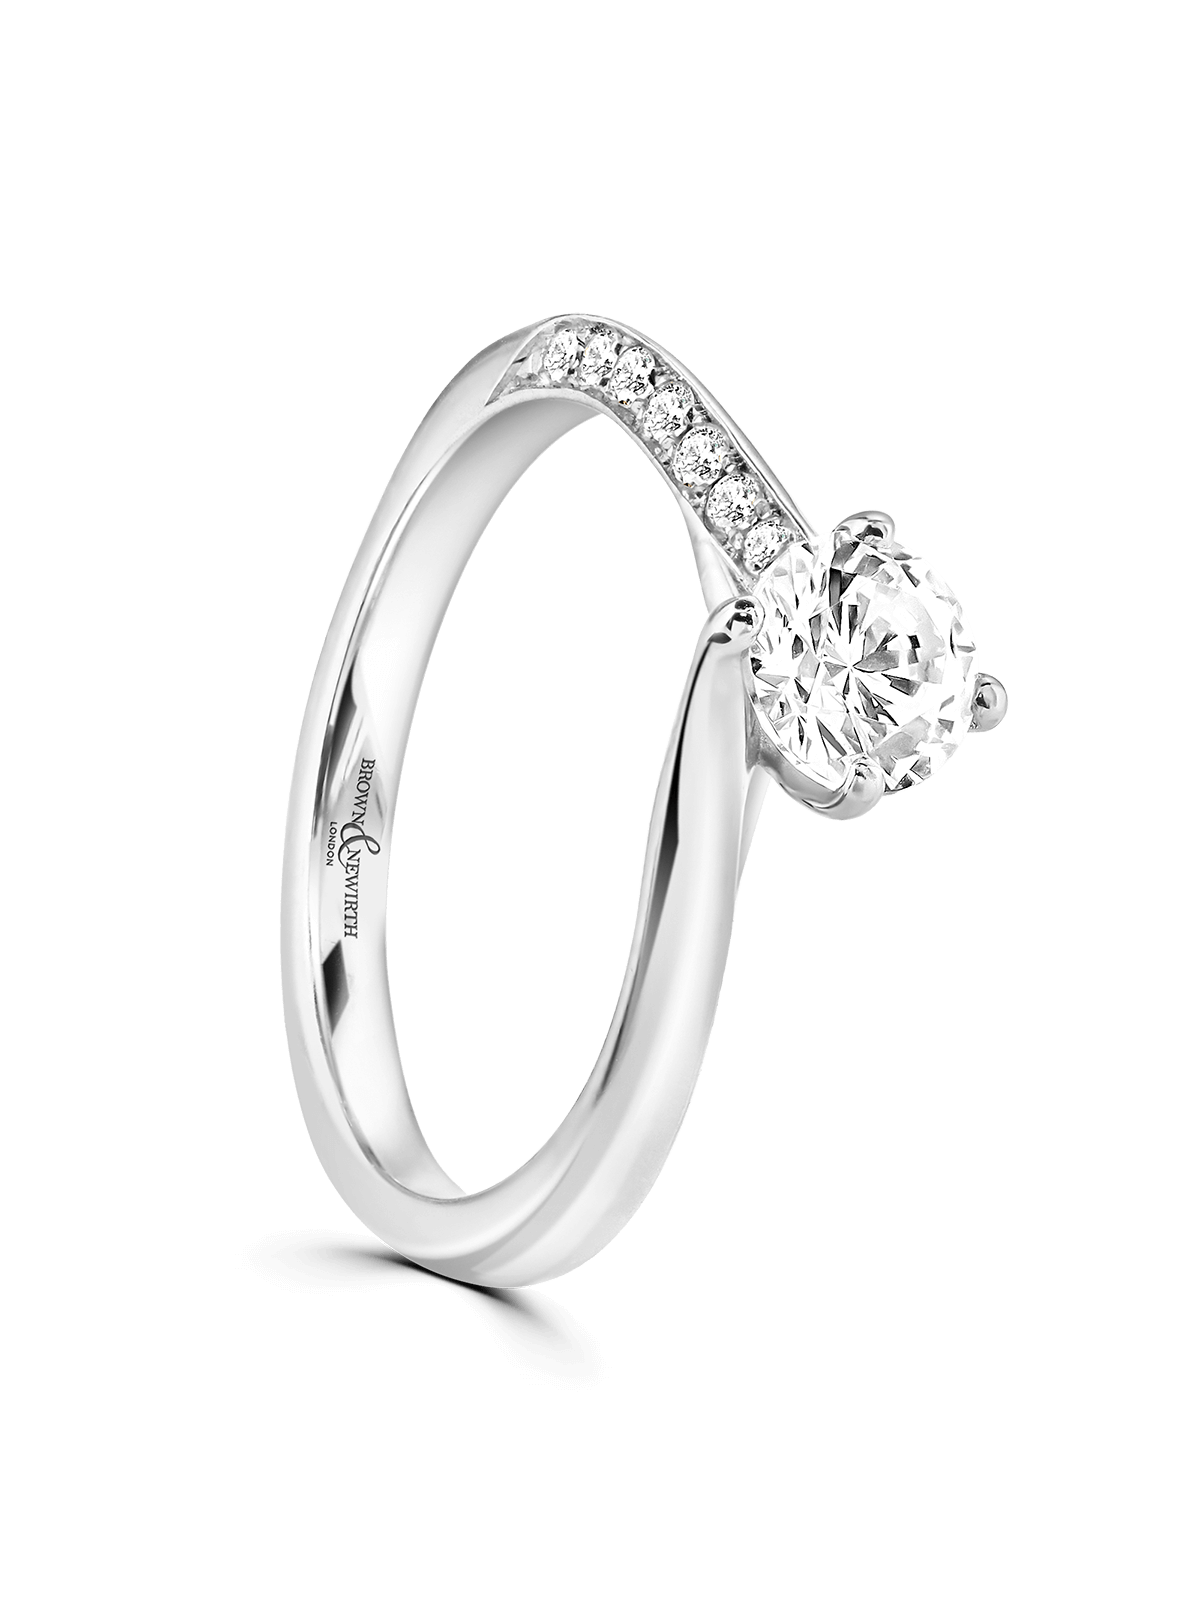 Brown & Newirth Alice 0.50ct Brilliant Cut Certificated Diamond Solitaire Engagement Ring in Platinum with Diamond Set Shoulders